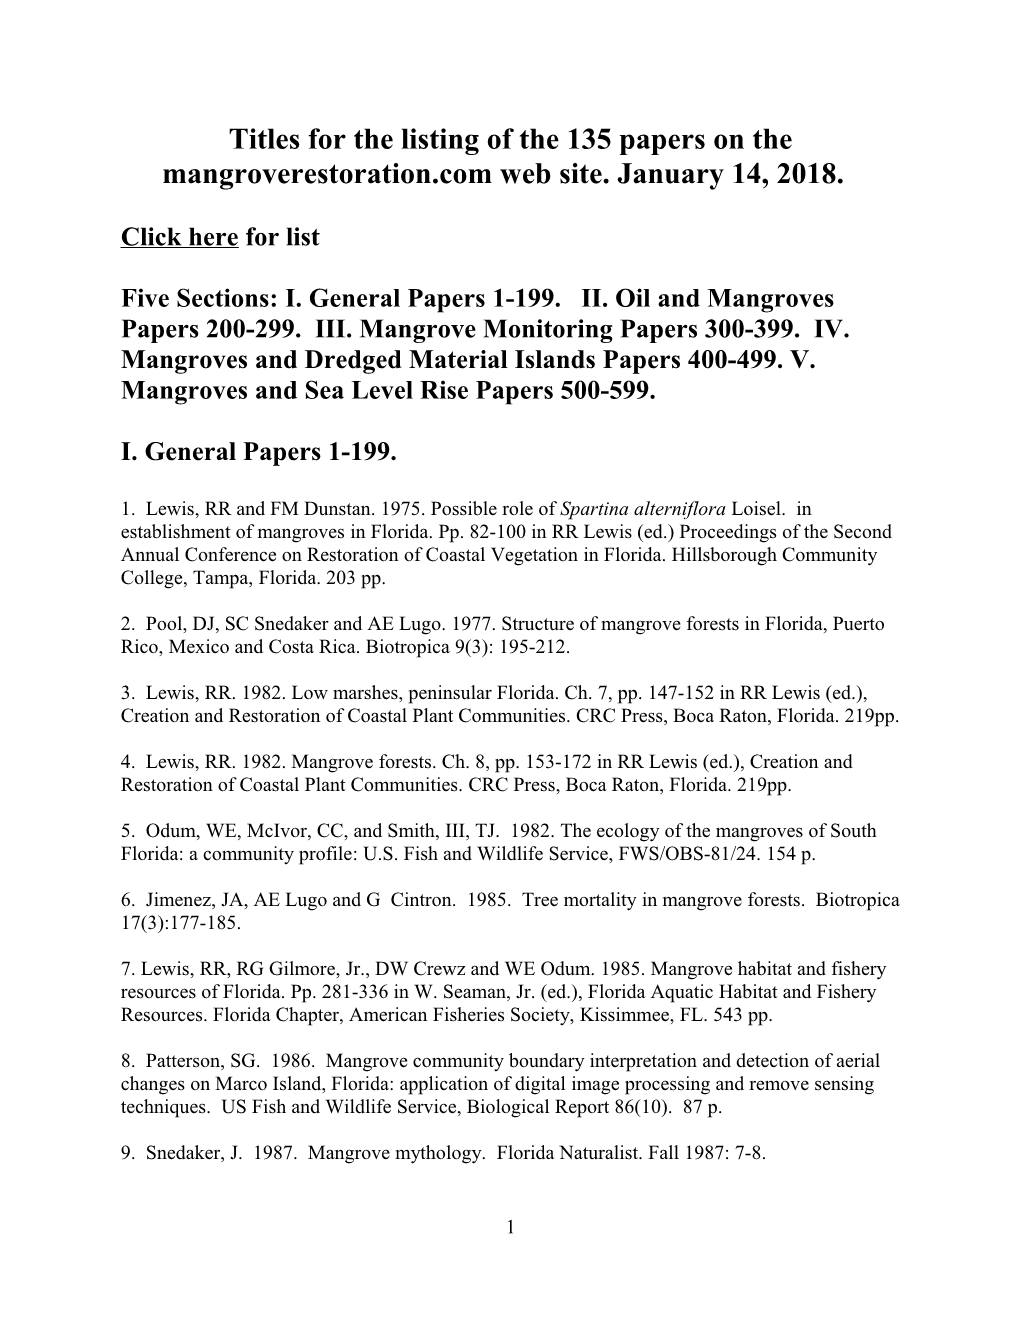 Titles for the Listing of 79 Papers on the Mangroverestoration Web Site